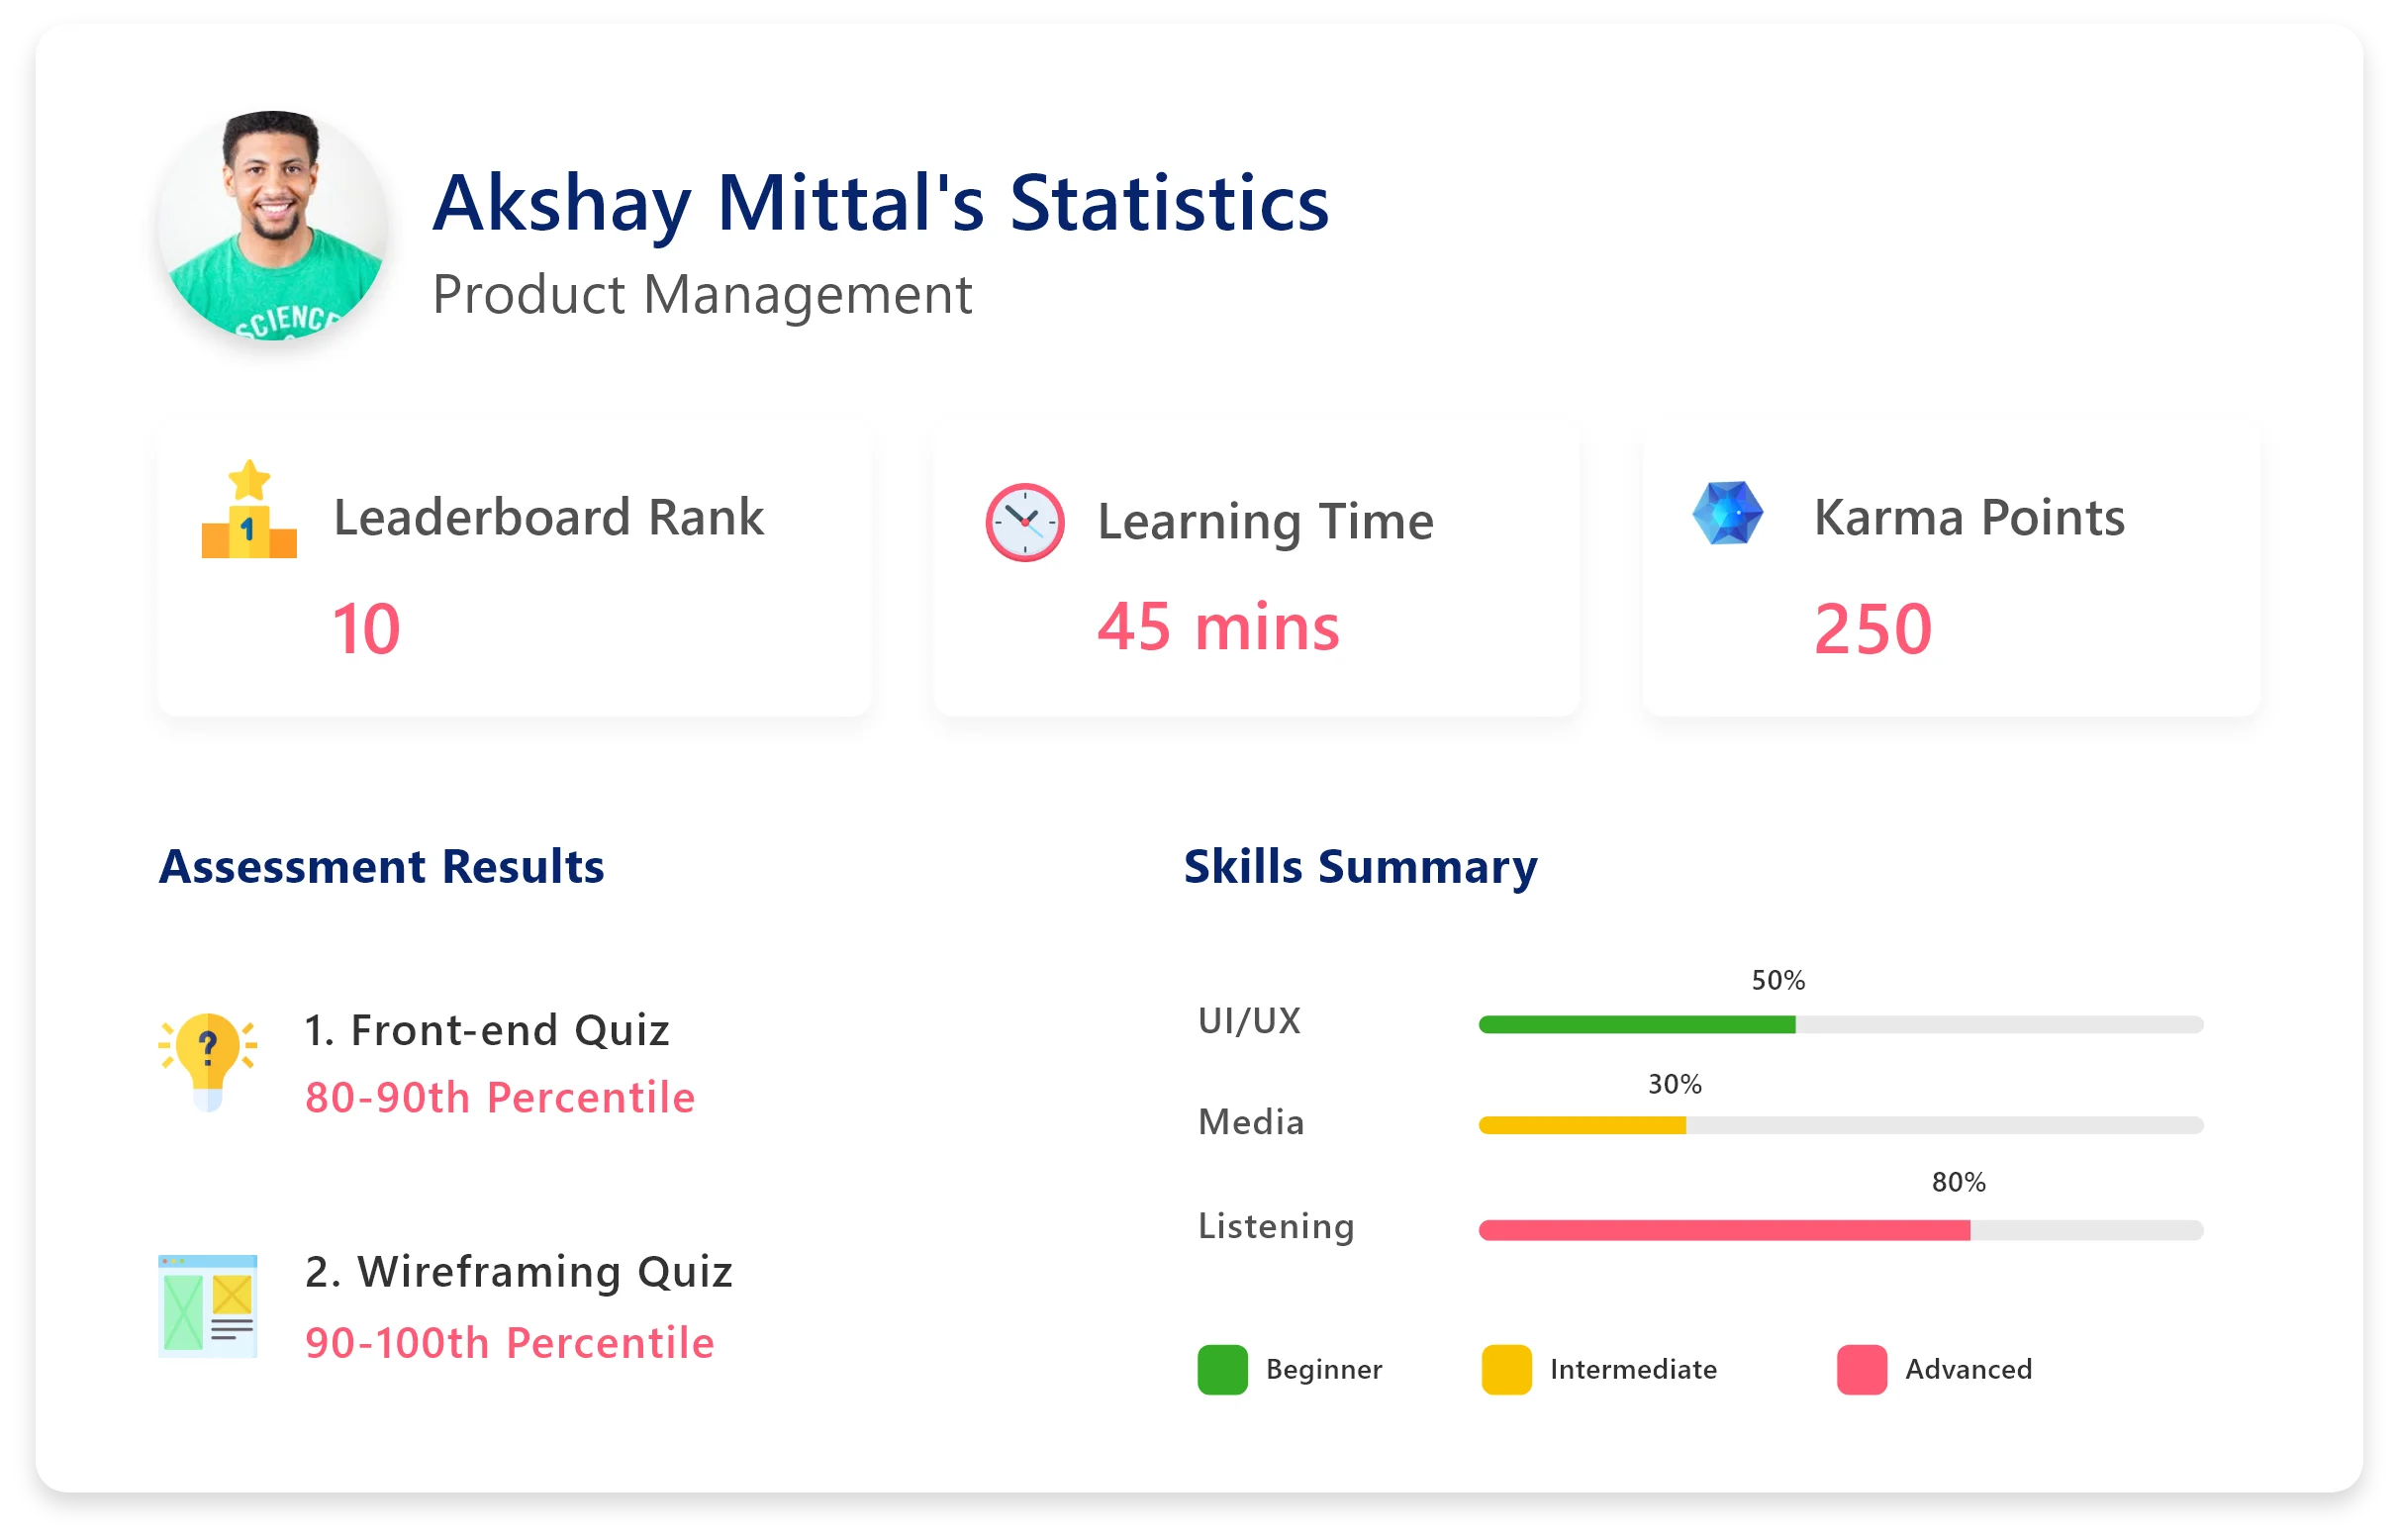 User's personal stats in form of dashboard